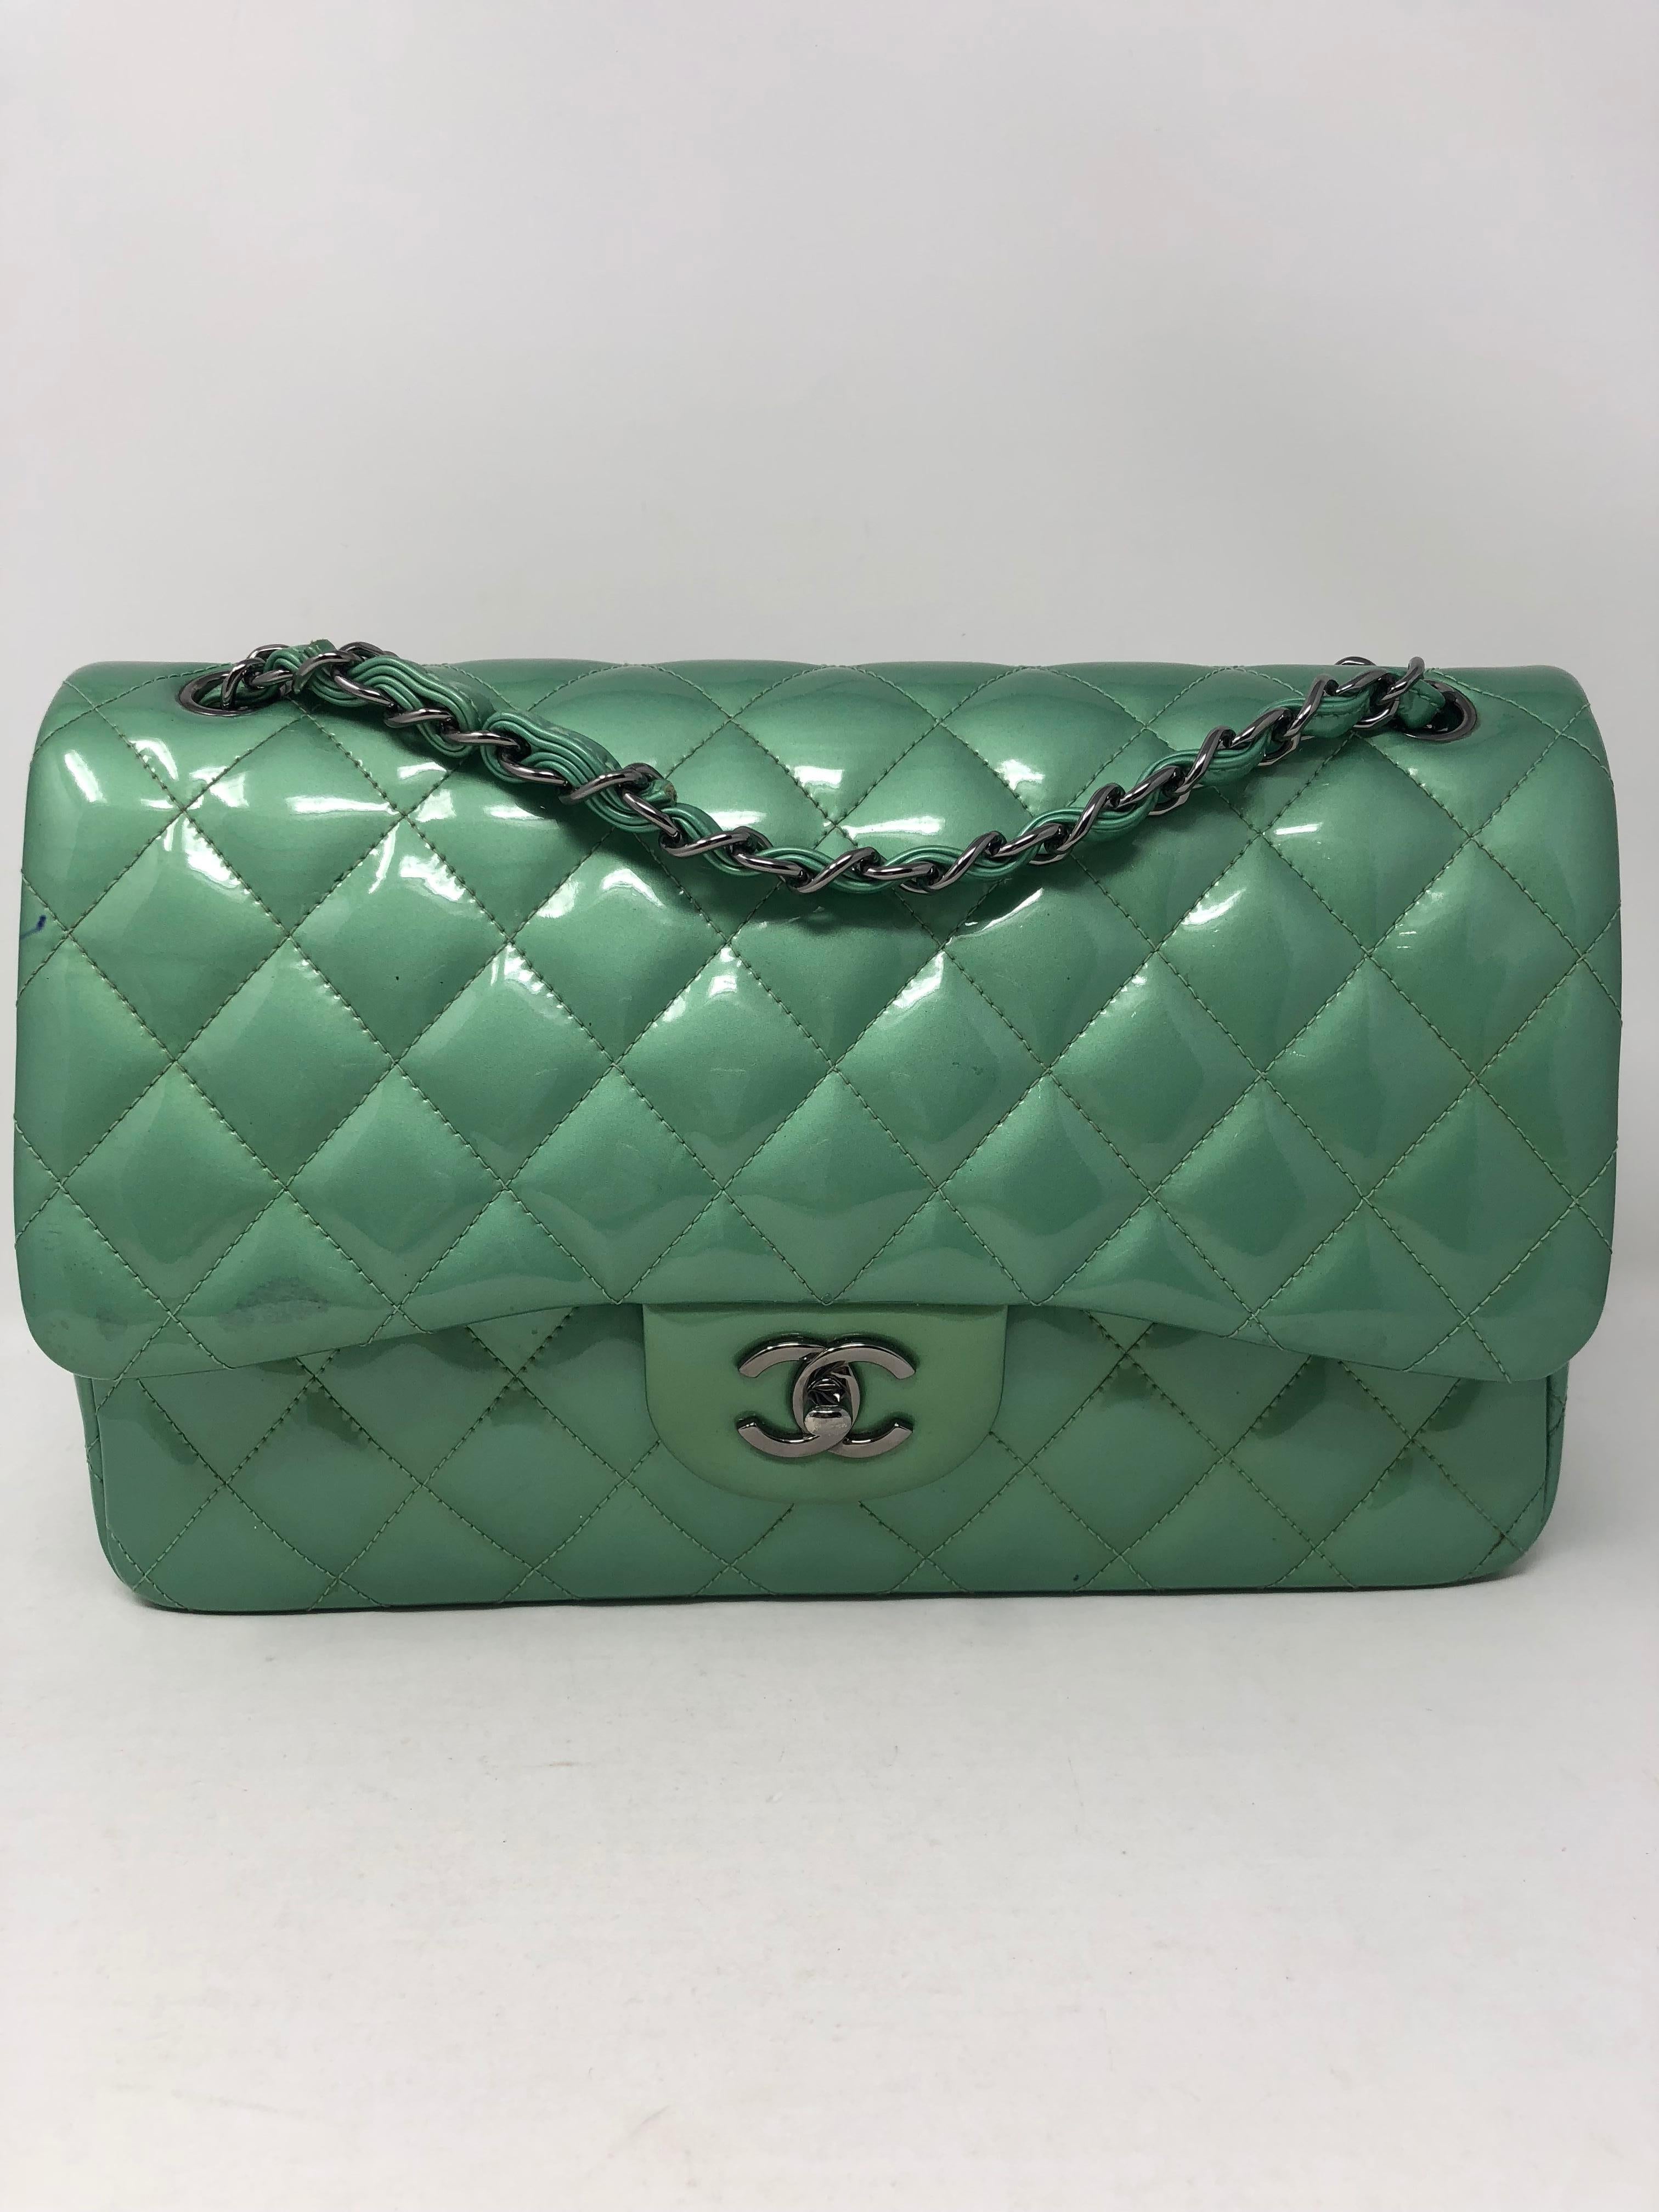 Chanel Green Menthe Patent Jumbo double flap bag 11